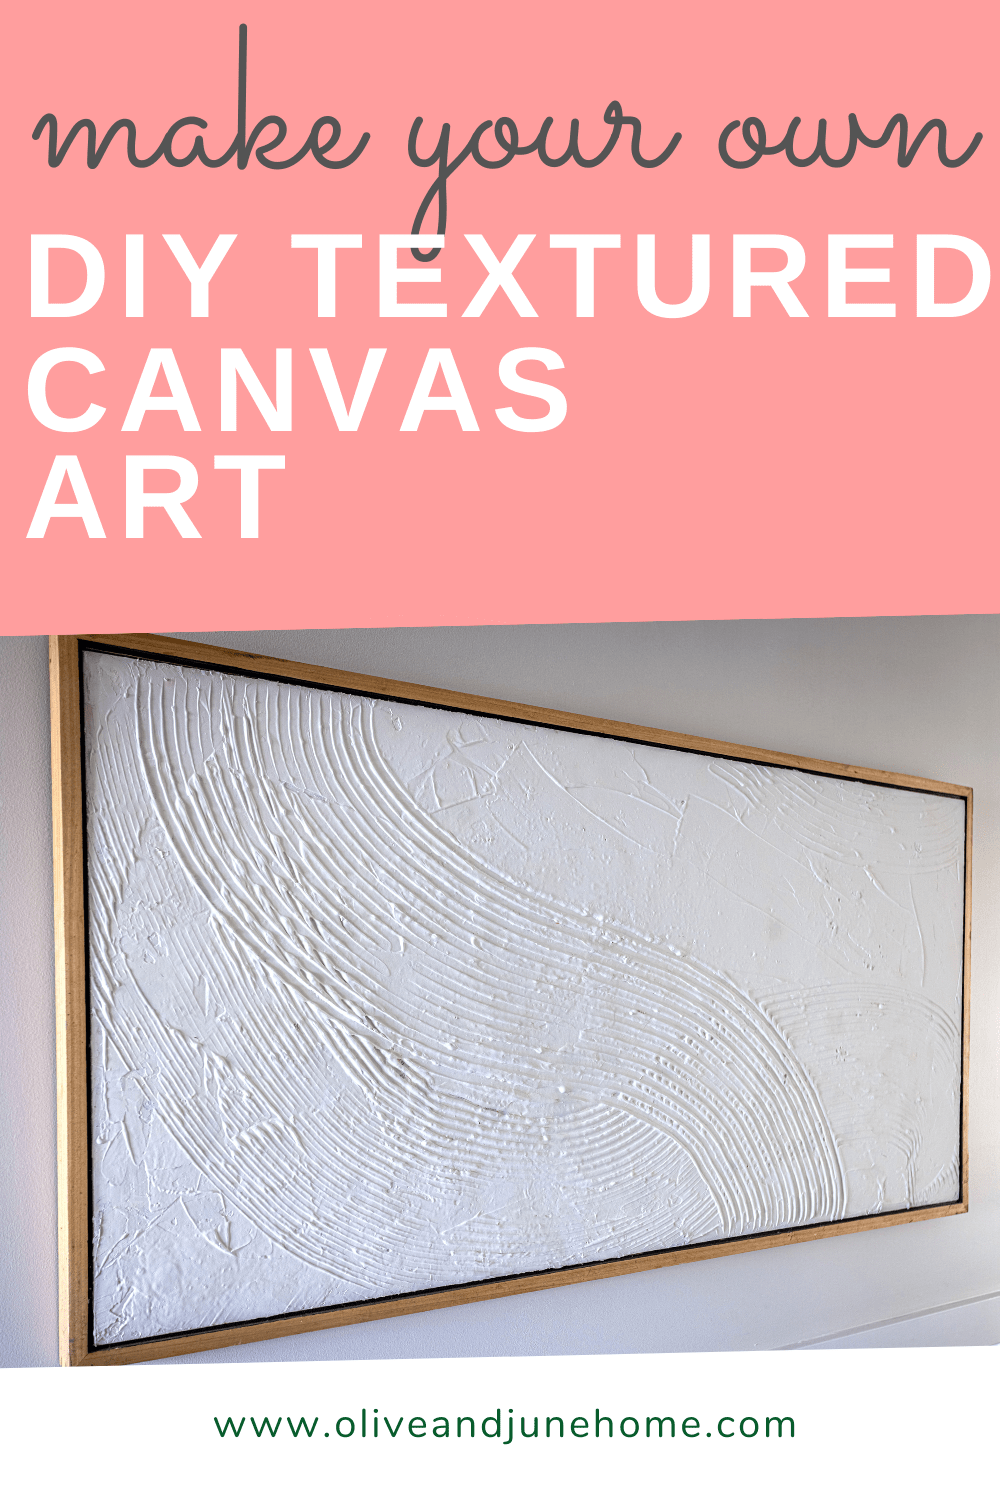 How to Make Trendy Textured Canvas Art in 4 Easy Steps